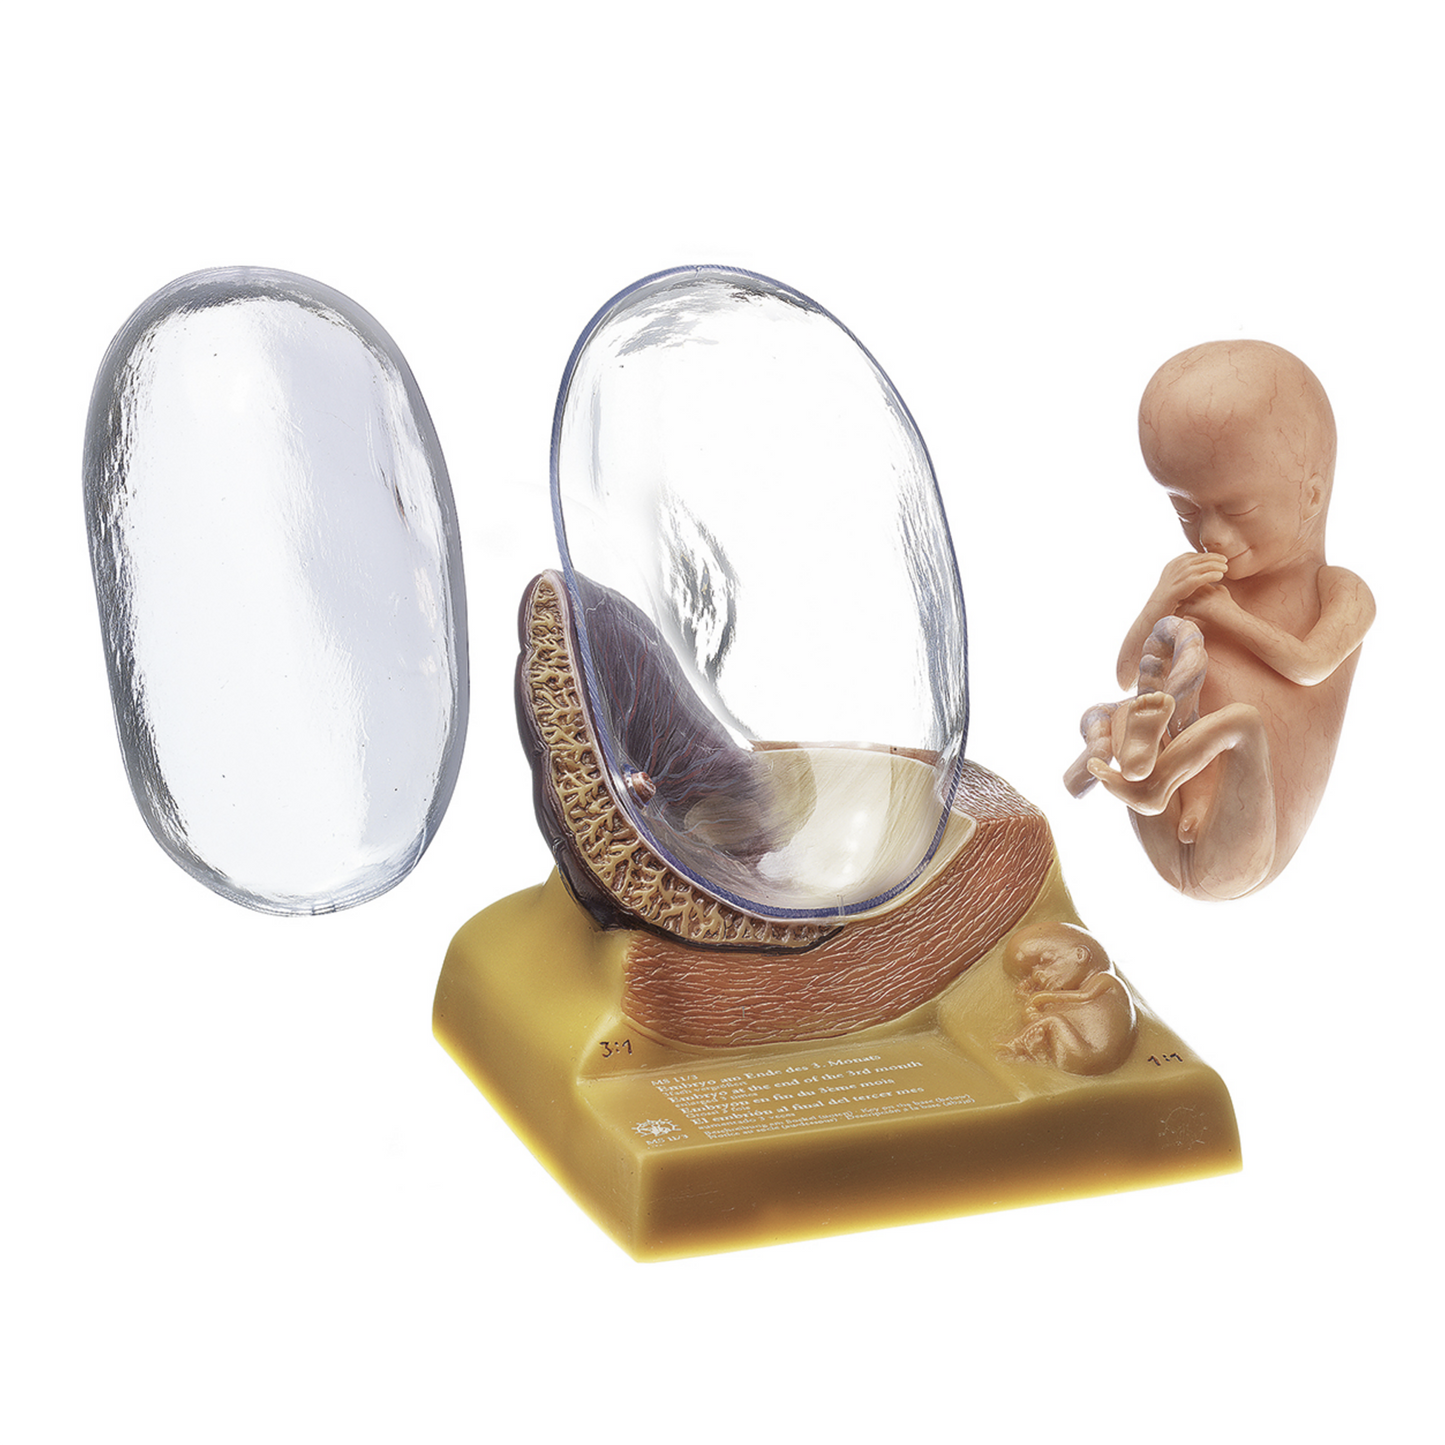 Anatomical model of the fetus in the 3rd month of pregnancy